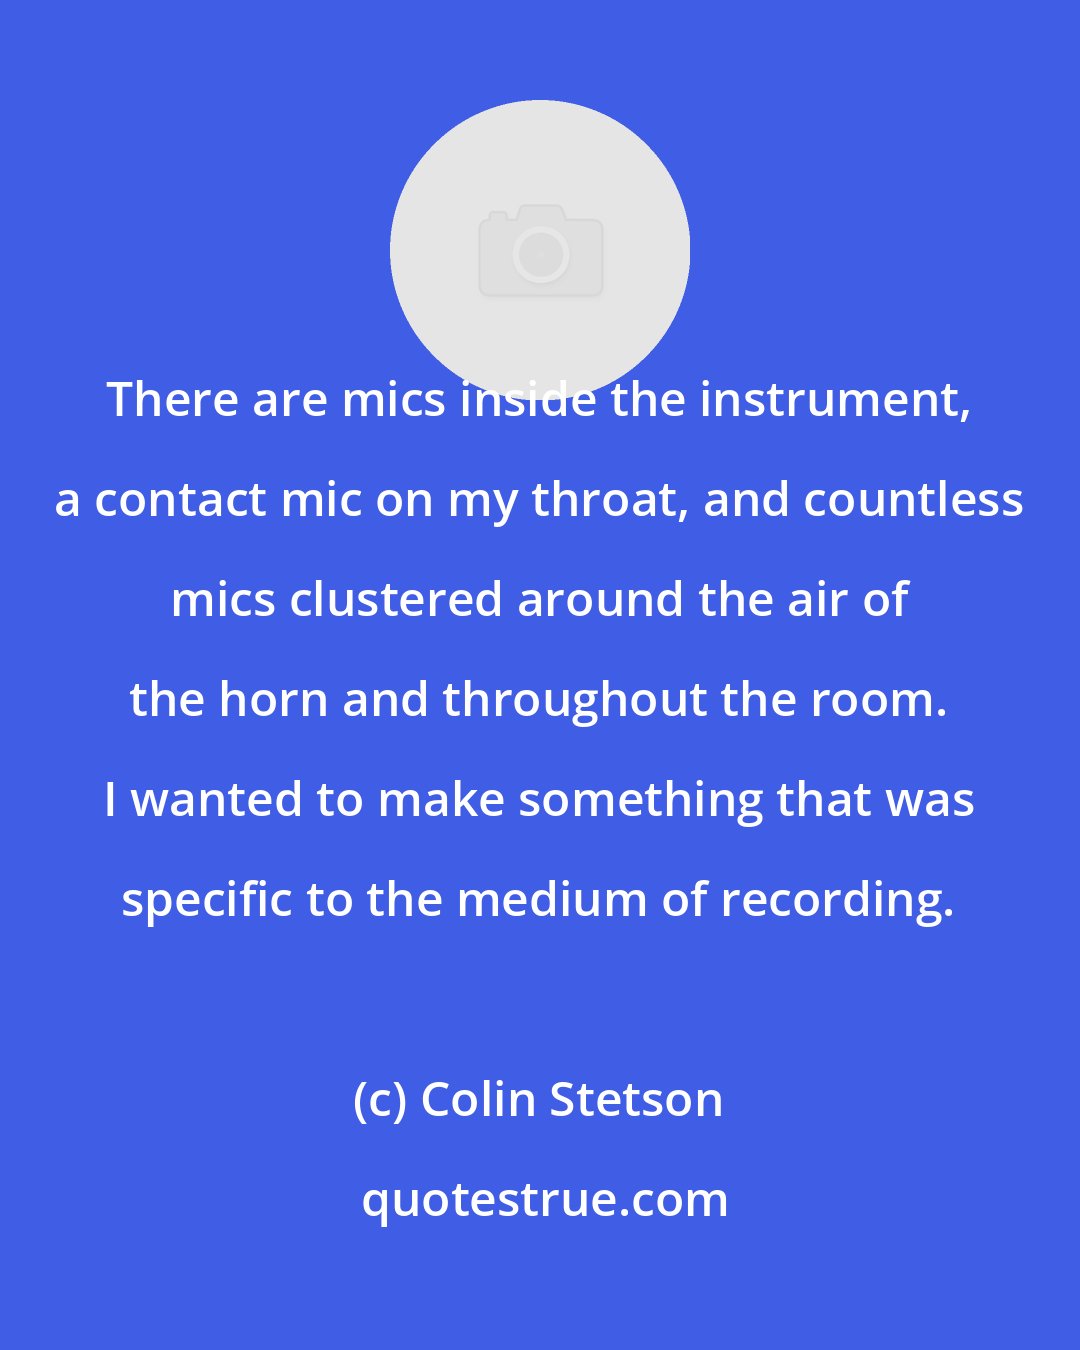 Colin Stetson: There are mics inside the instrument, a contact mic on my throat, and countless mics clustered around the air of the horn and throughout the room. I wanted to make something that was specific to the medium of recording.